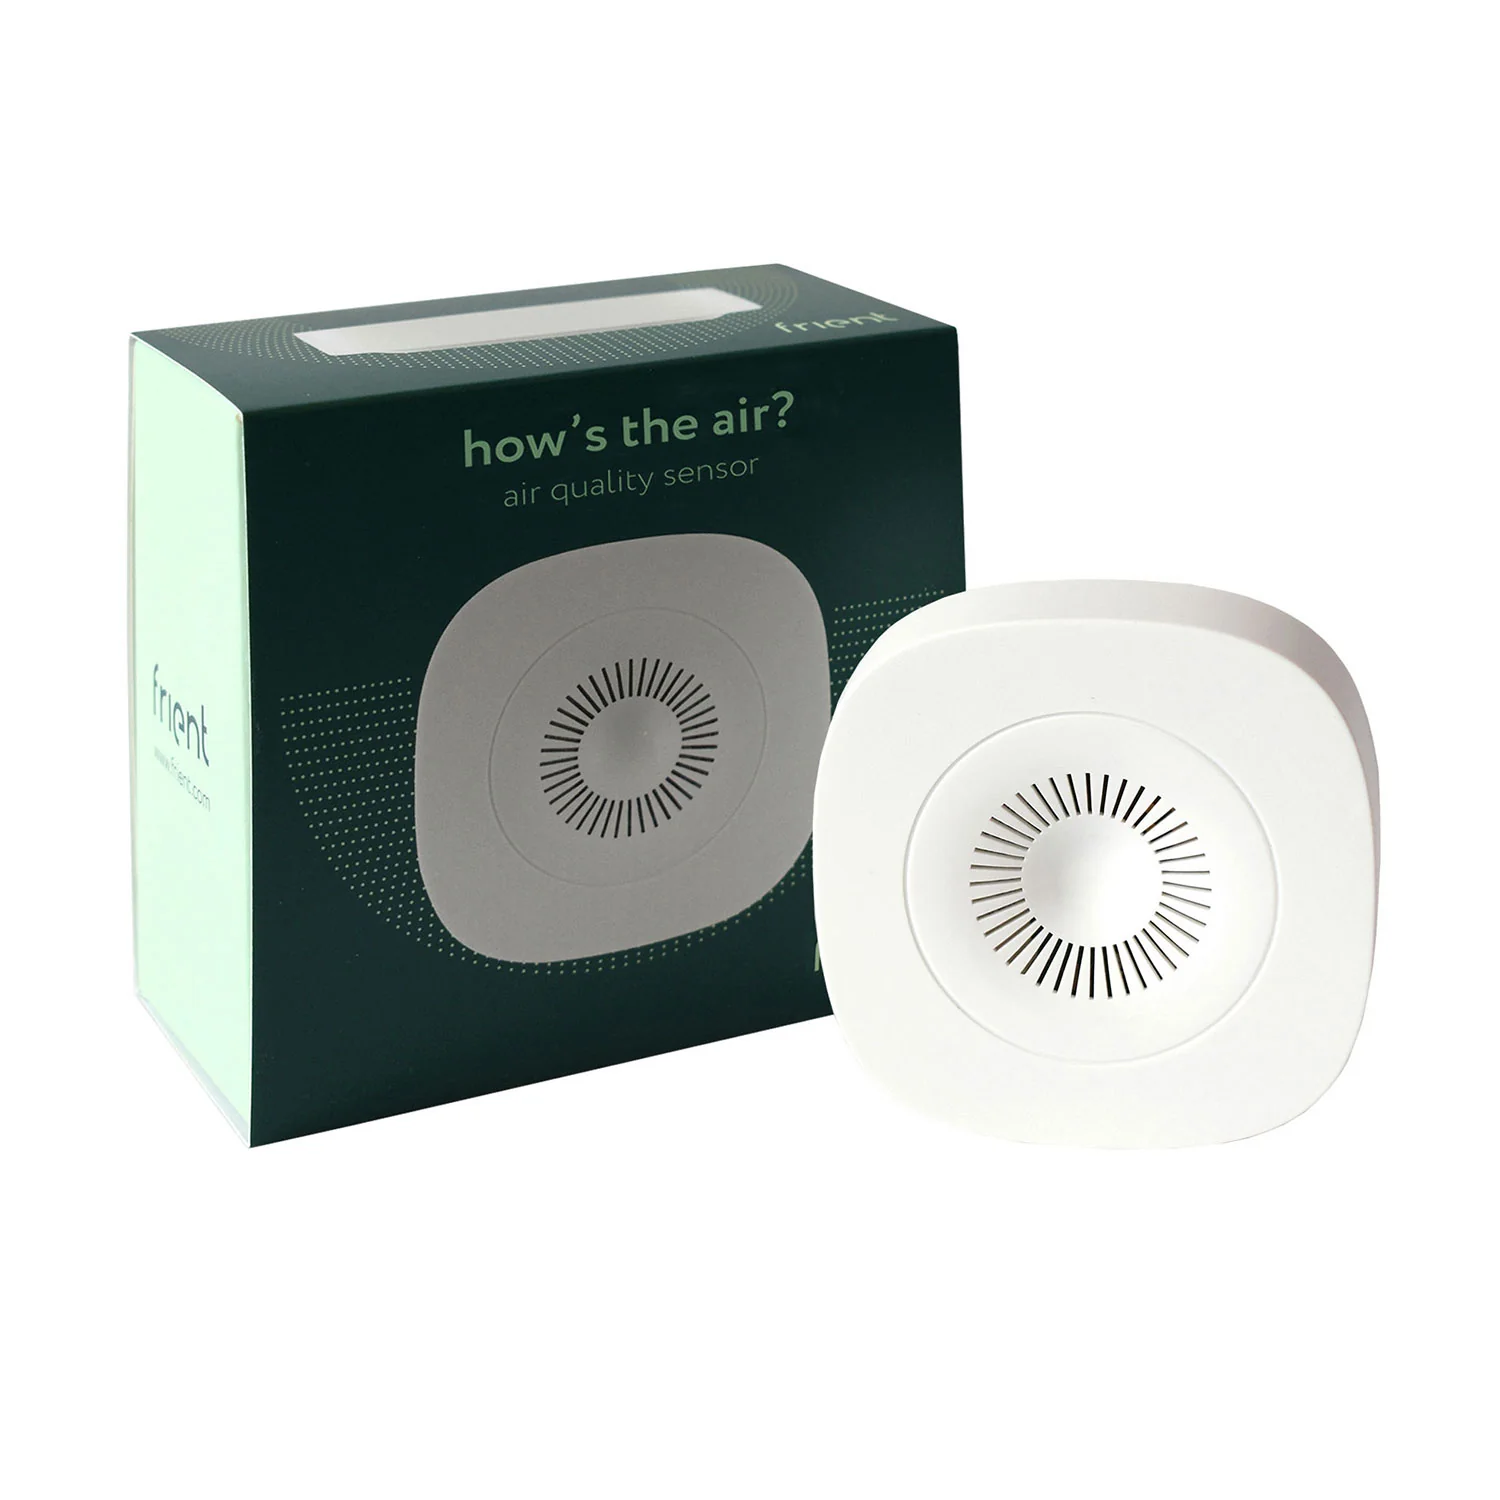 Does the SmartThings Air Quality Sensor include multiple sensors?